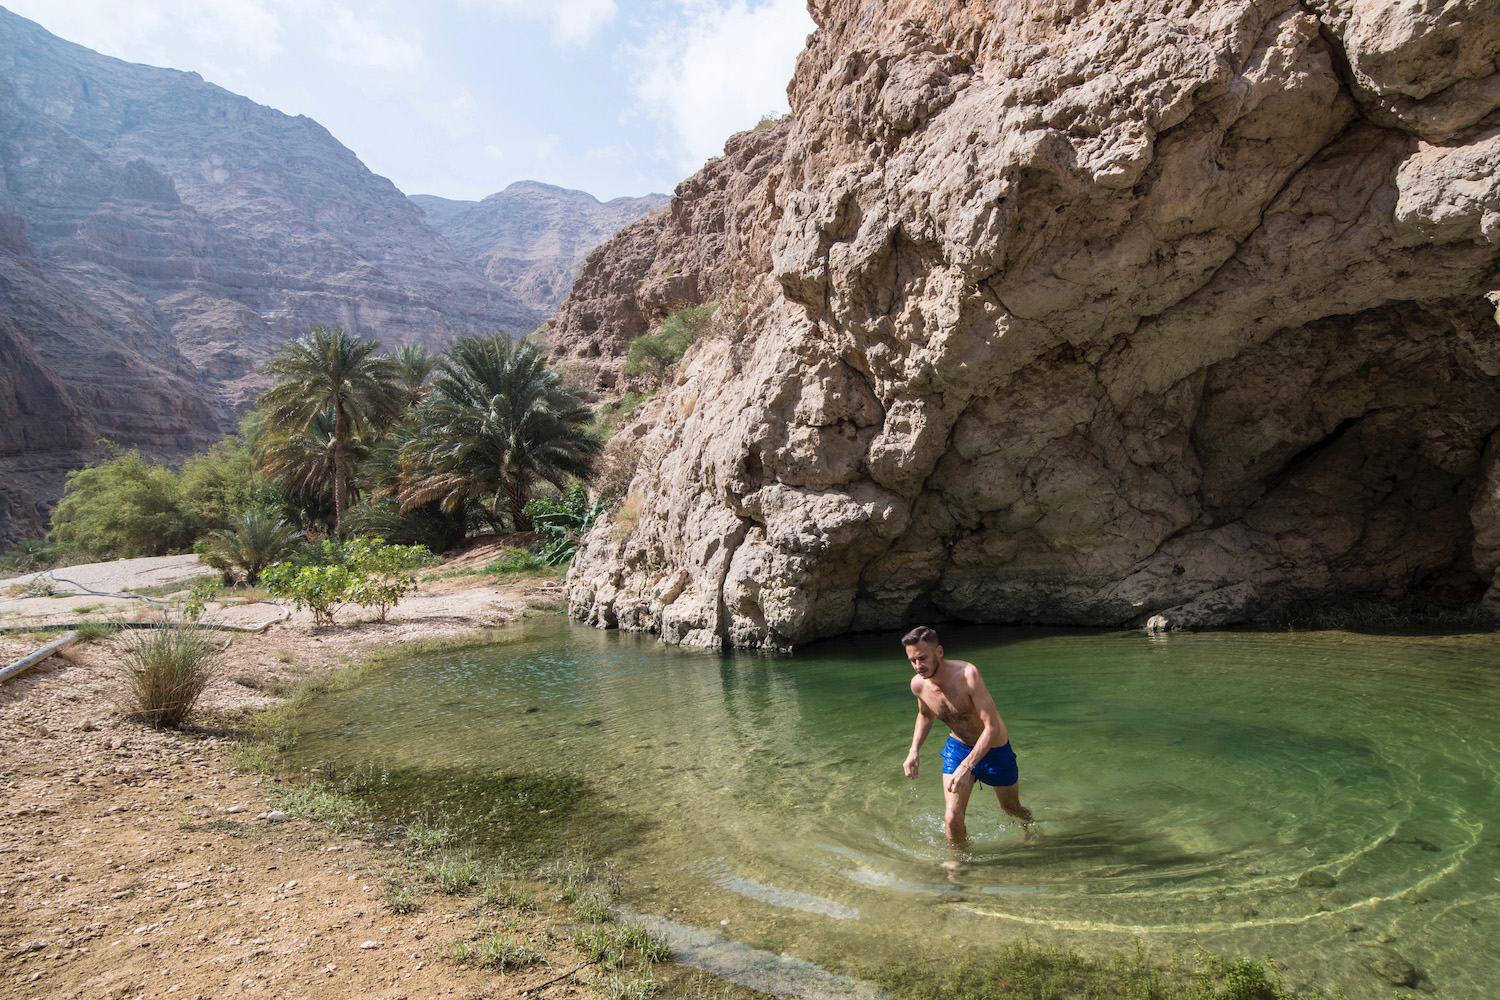 30 Pictures of Oman That Will Make You Want to Visit